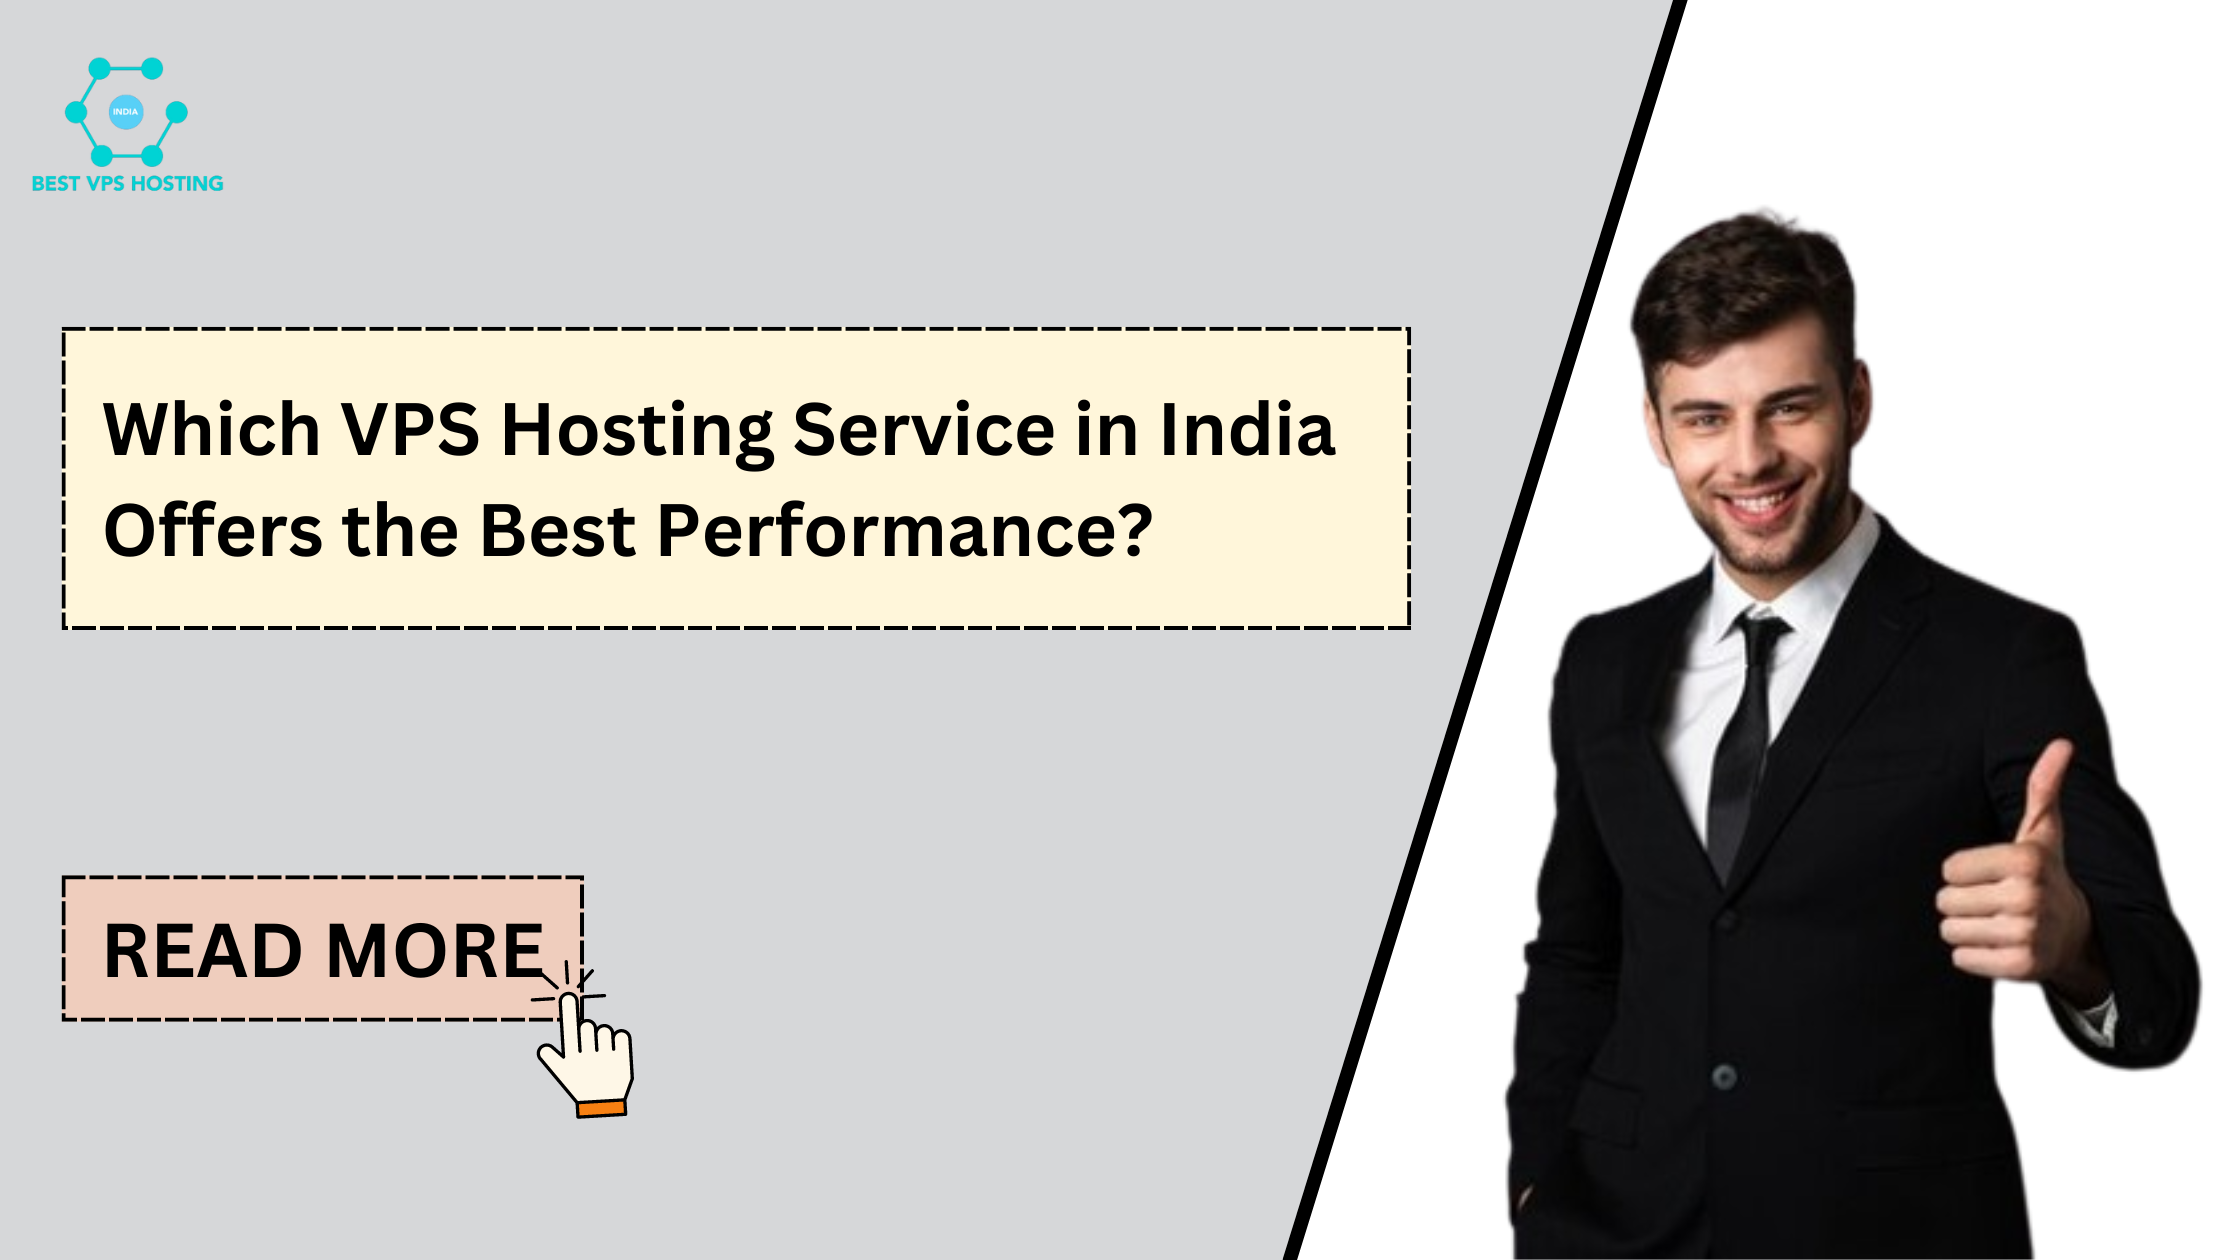 Which VPS Hosting Service in India Offers the Best Performance